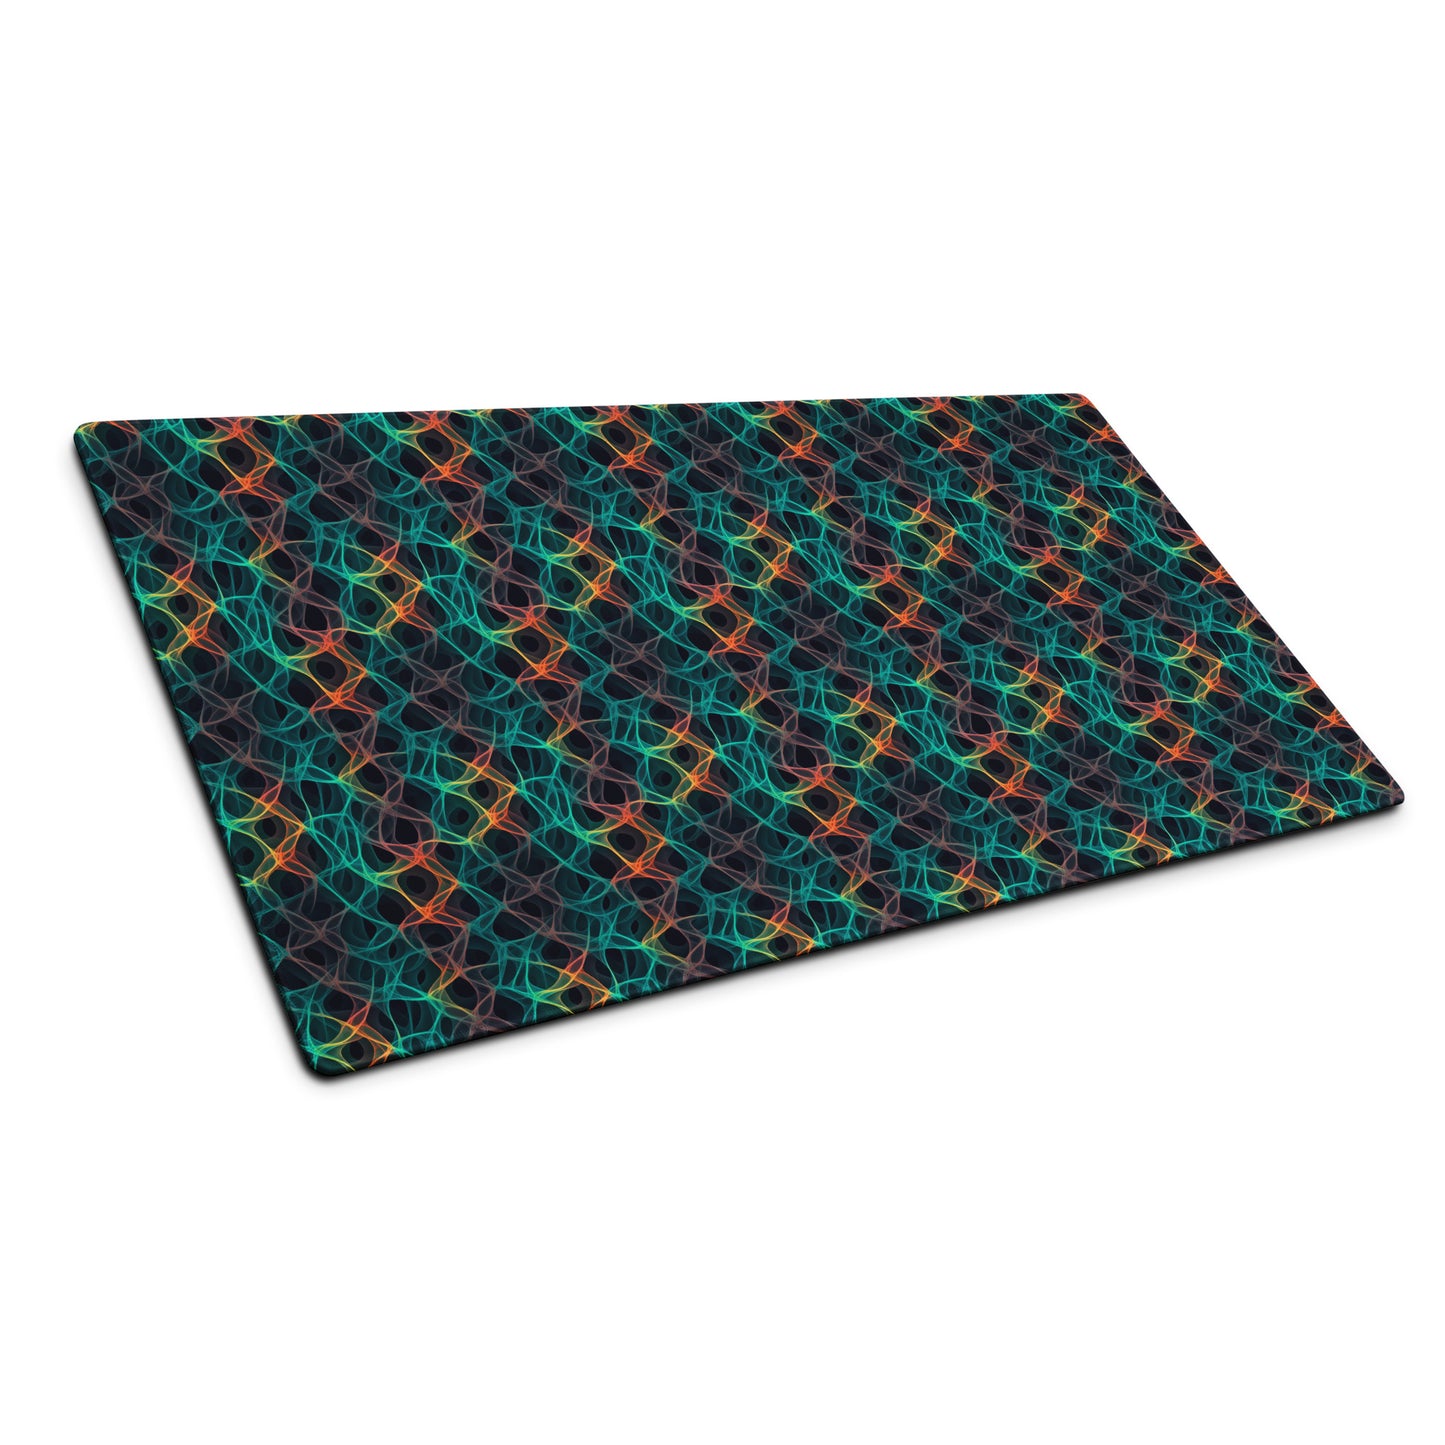 A 36" x 18" desk pad with an abstract pattern resembling a cell structure on it shown at an angle. Rainbow in color.